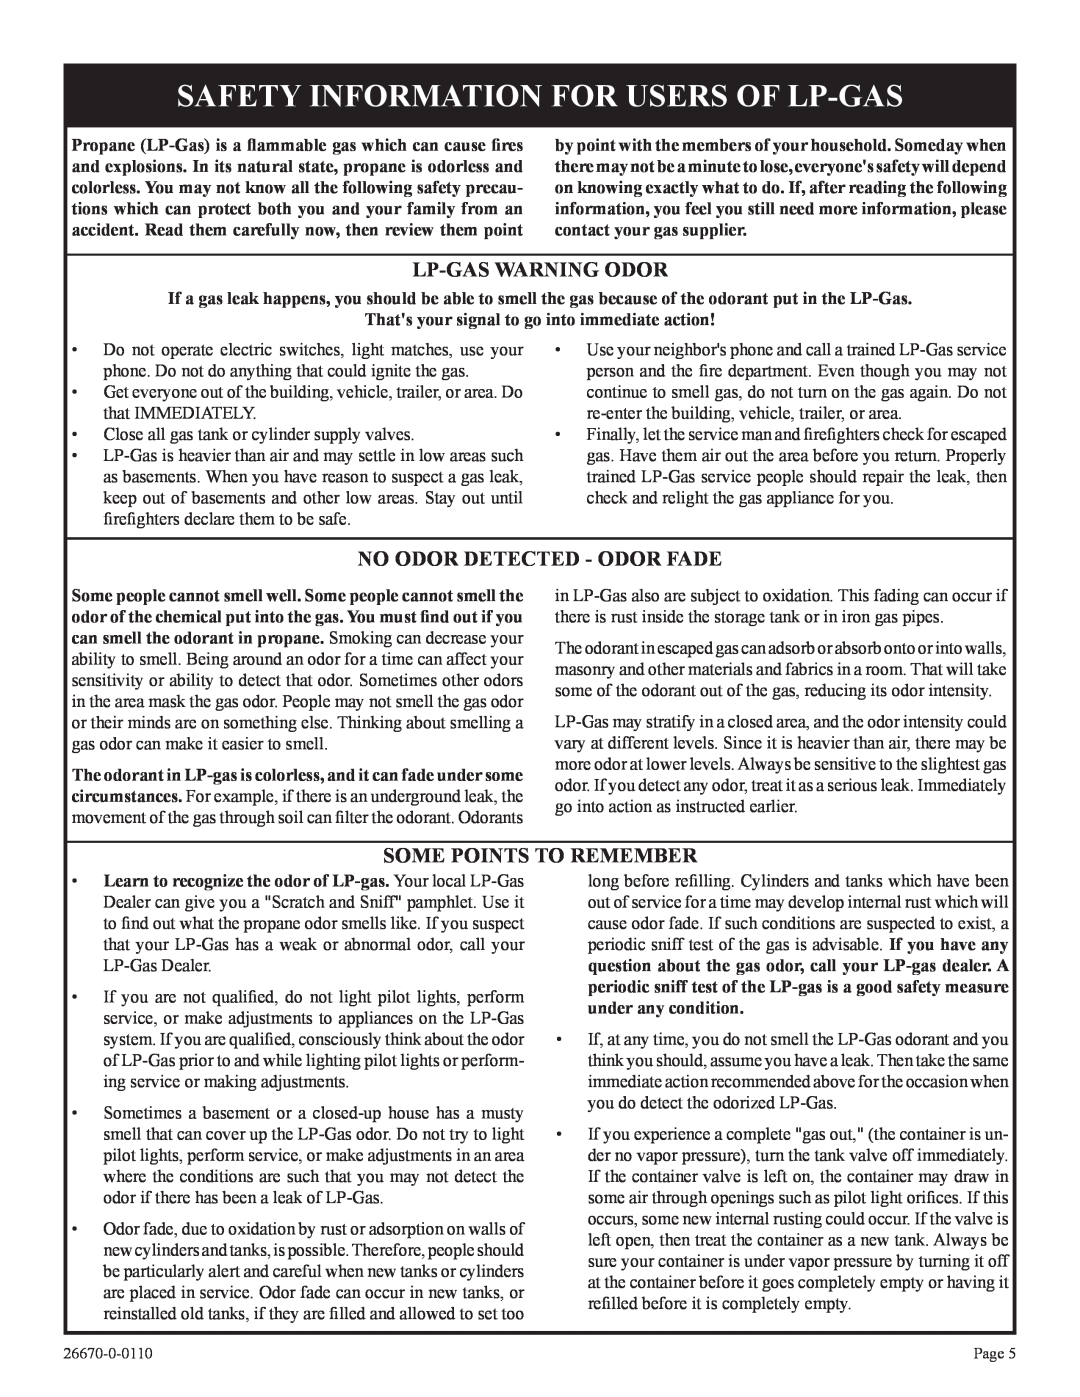 Empire Comfort Systems VFP36PP32EN-2 Safety Information For Users Of Lp-Gas, Lp-Gaswarning Odor, some points to remember 